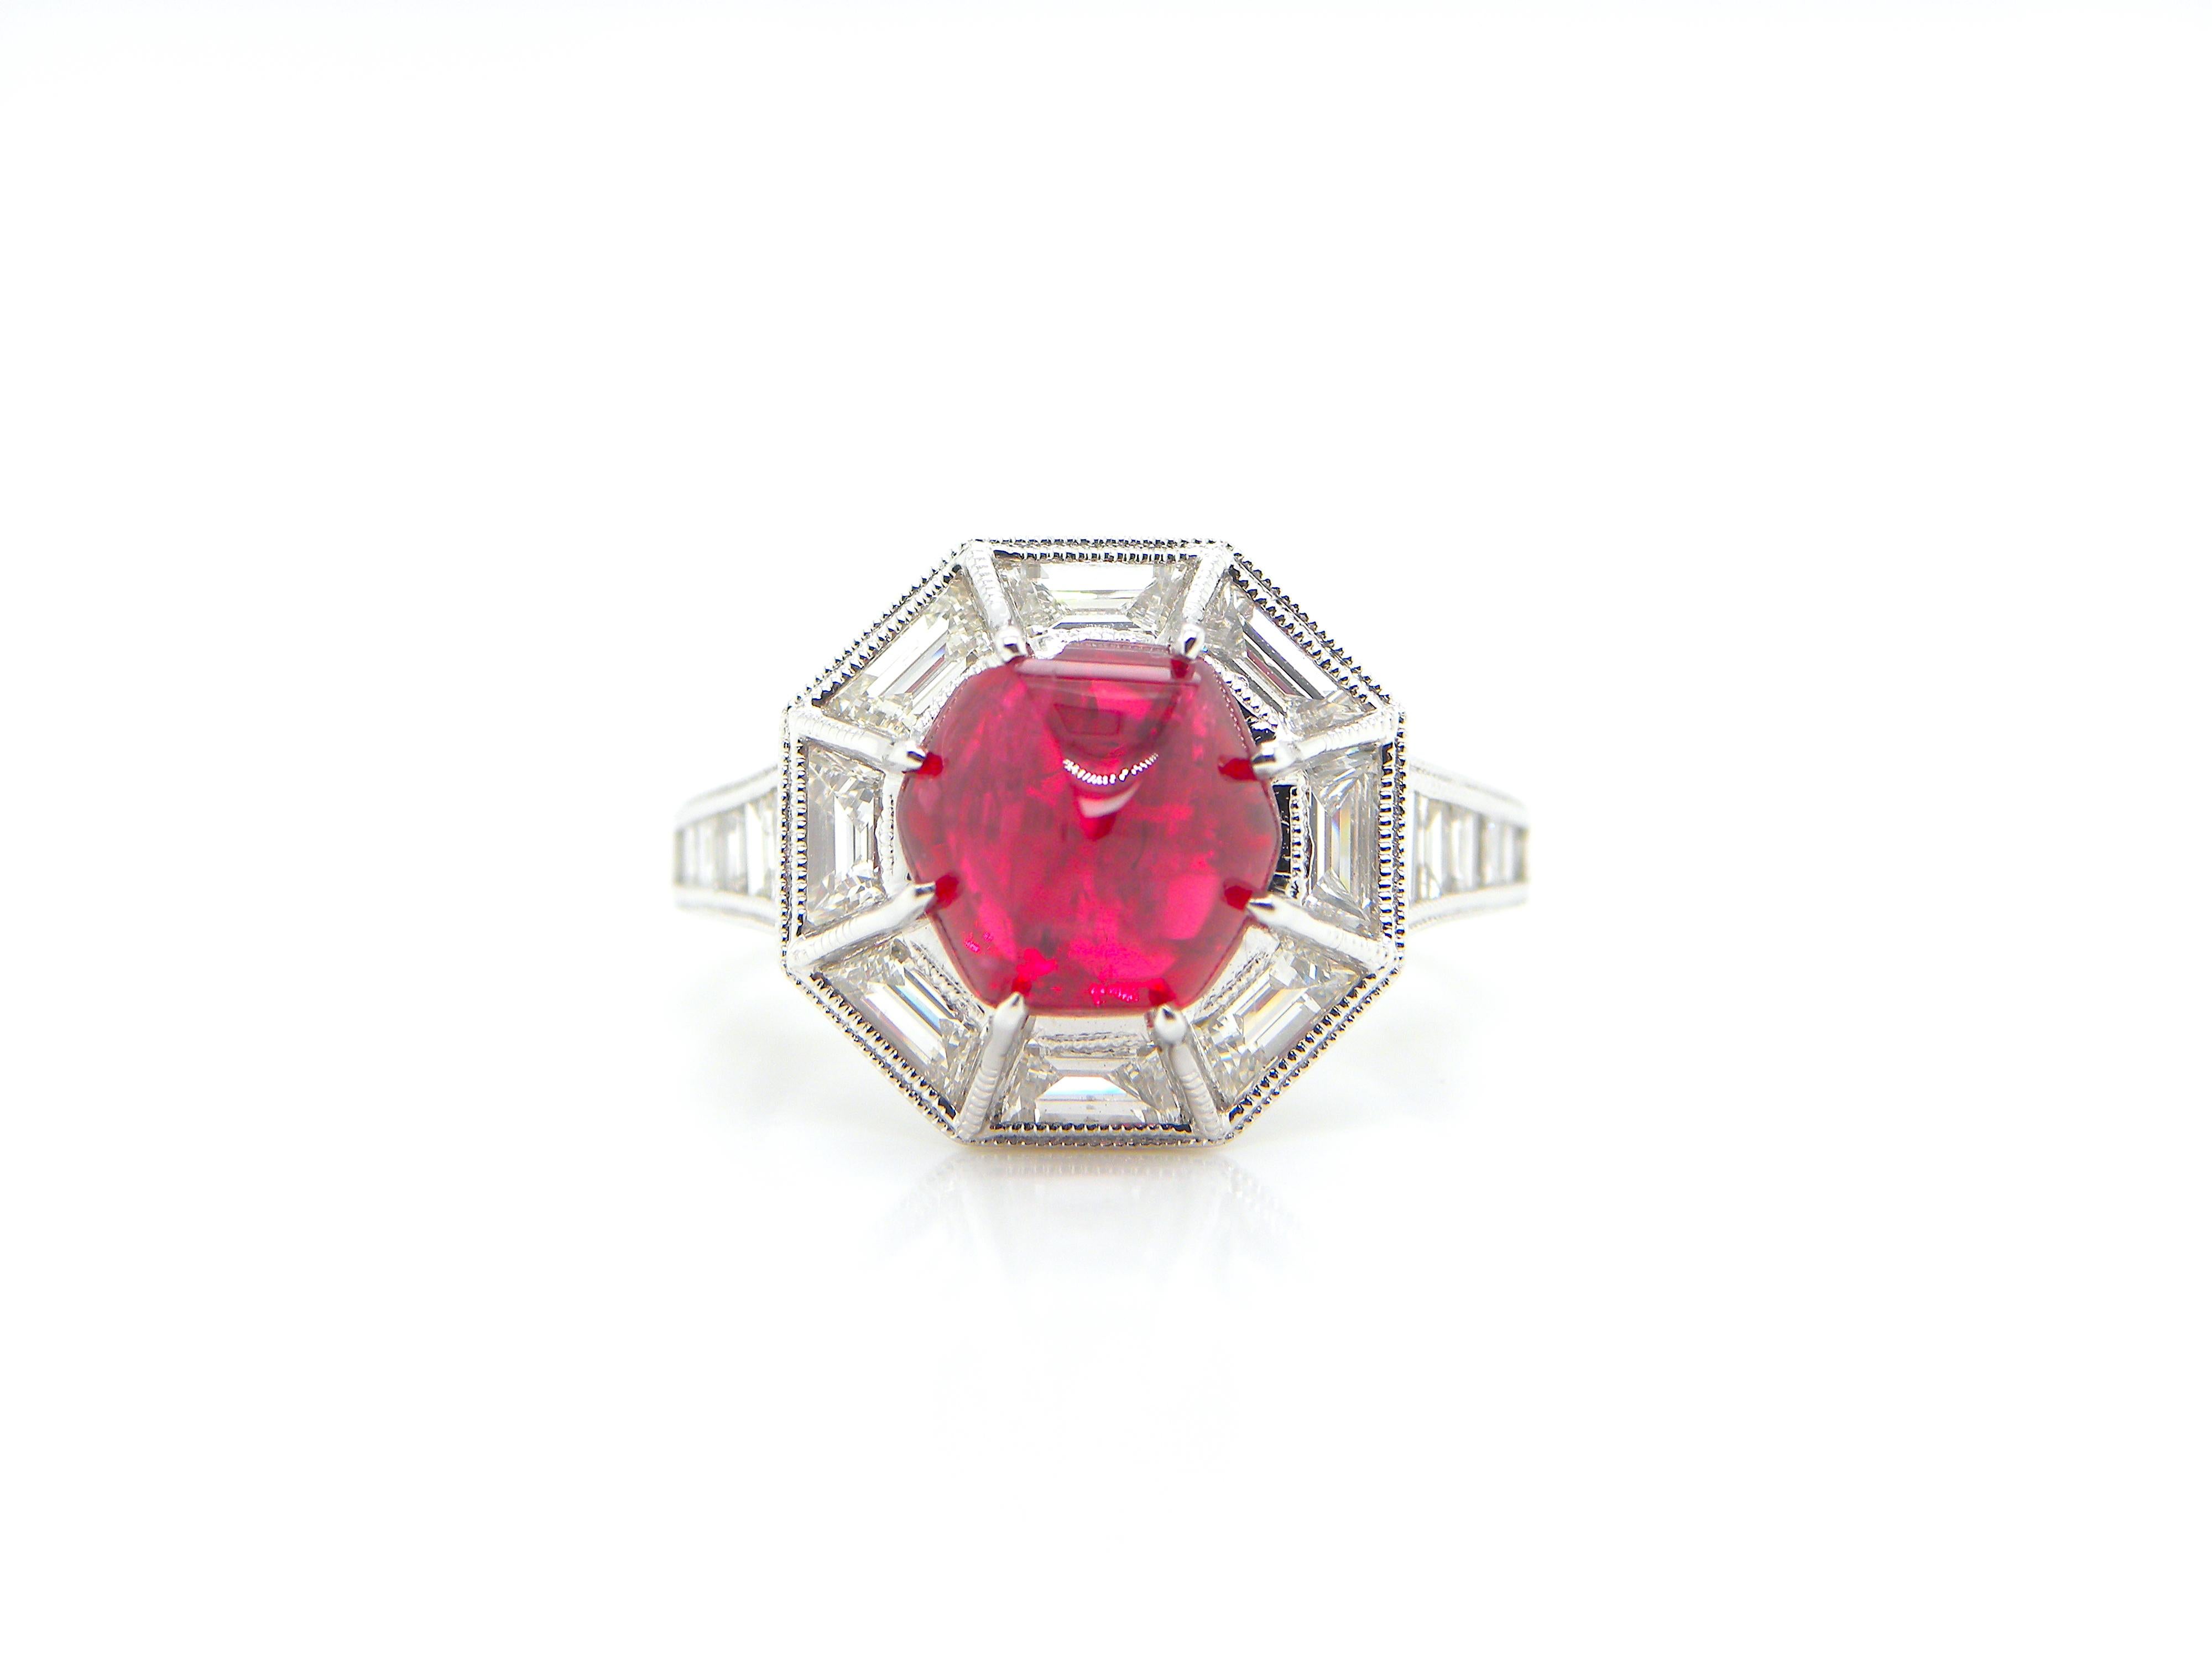 Sugarloaf Cabochon 3.04 Carat GIA Certified Burma No Heat Vivid Red Spinel and White Diamond Ring